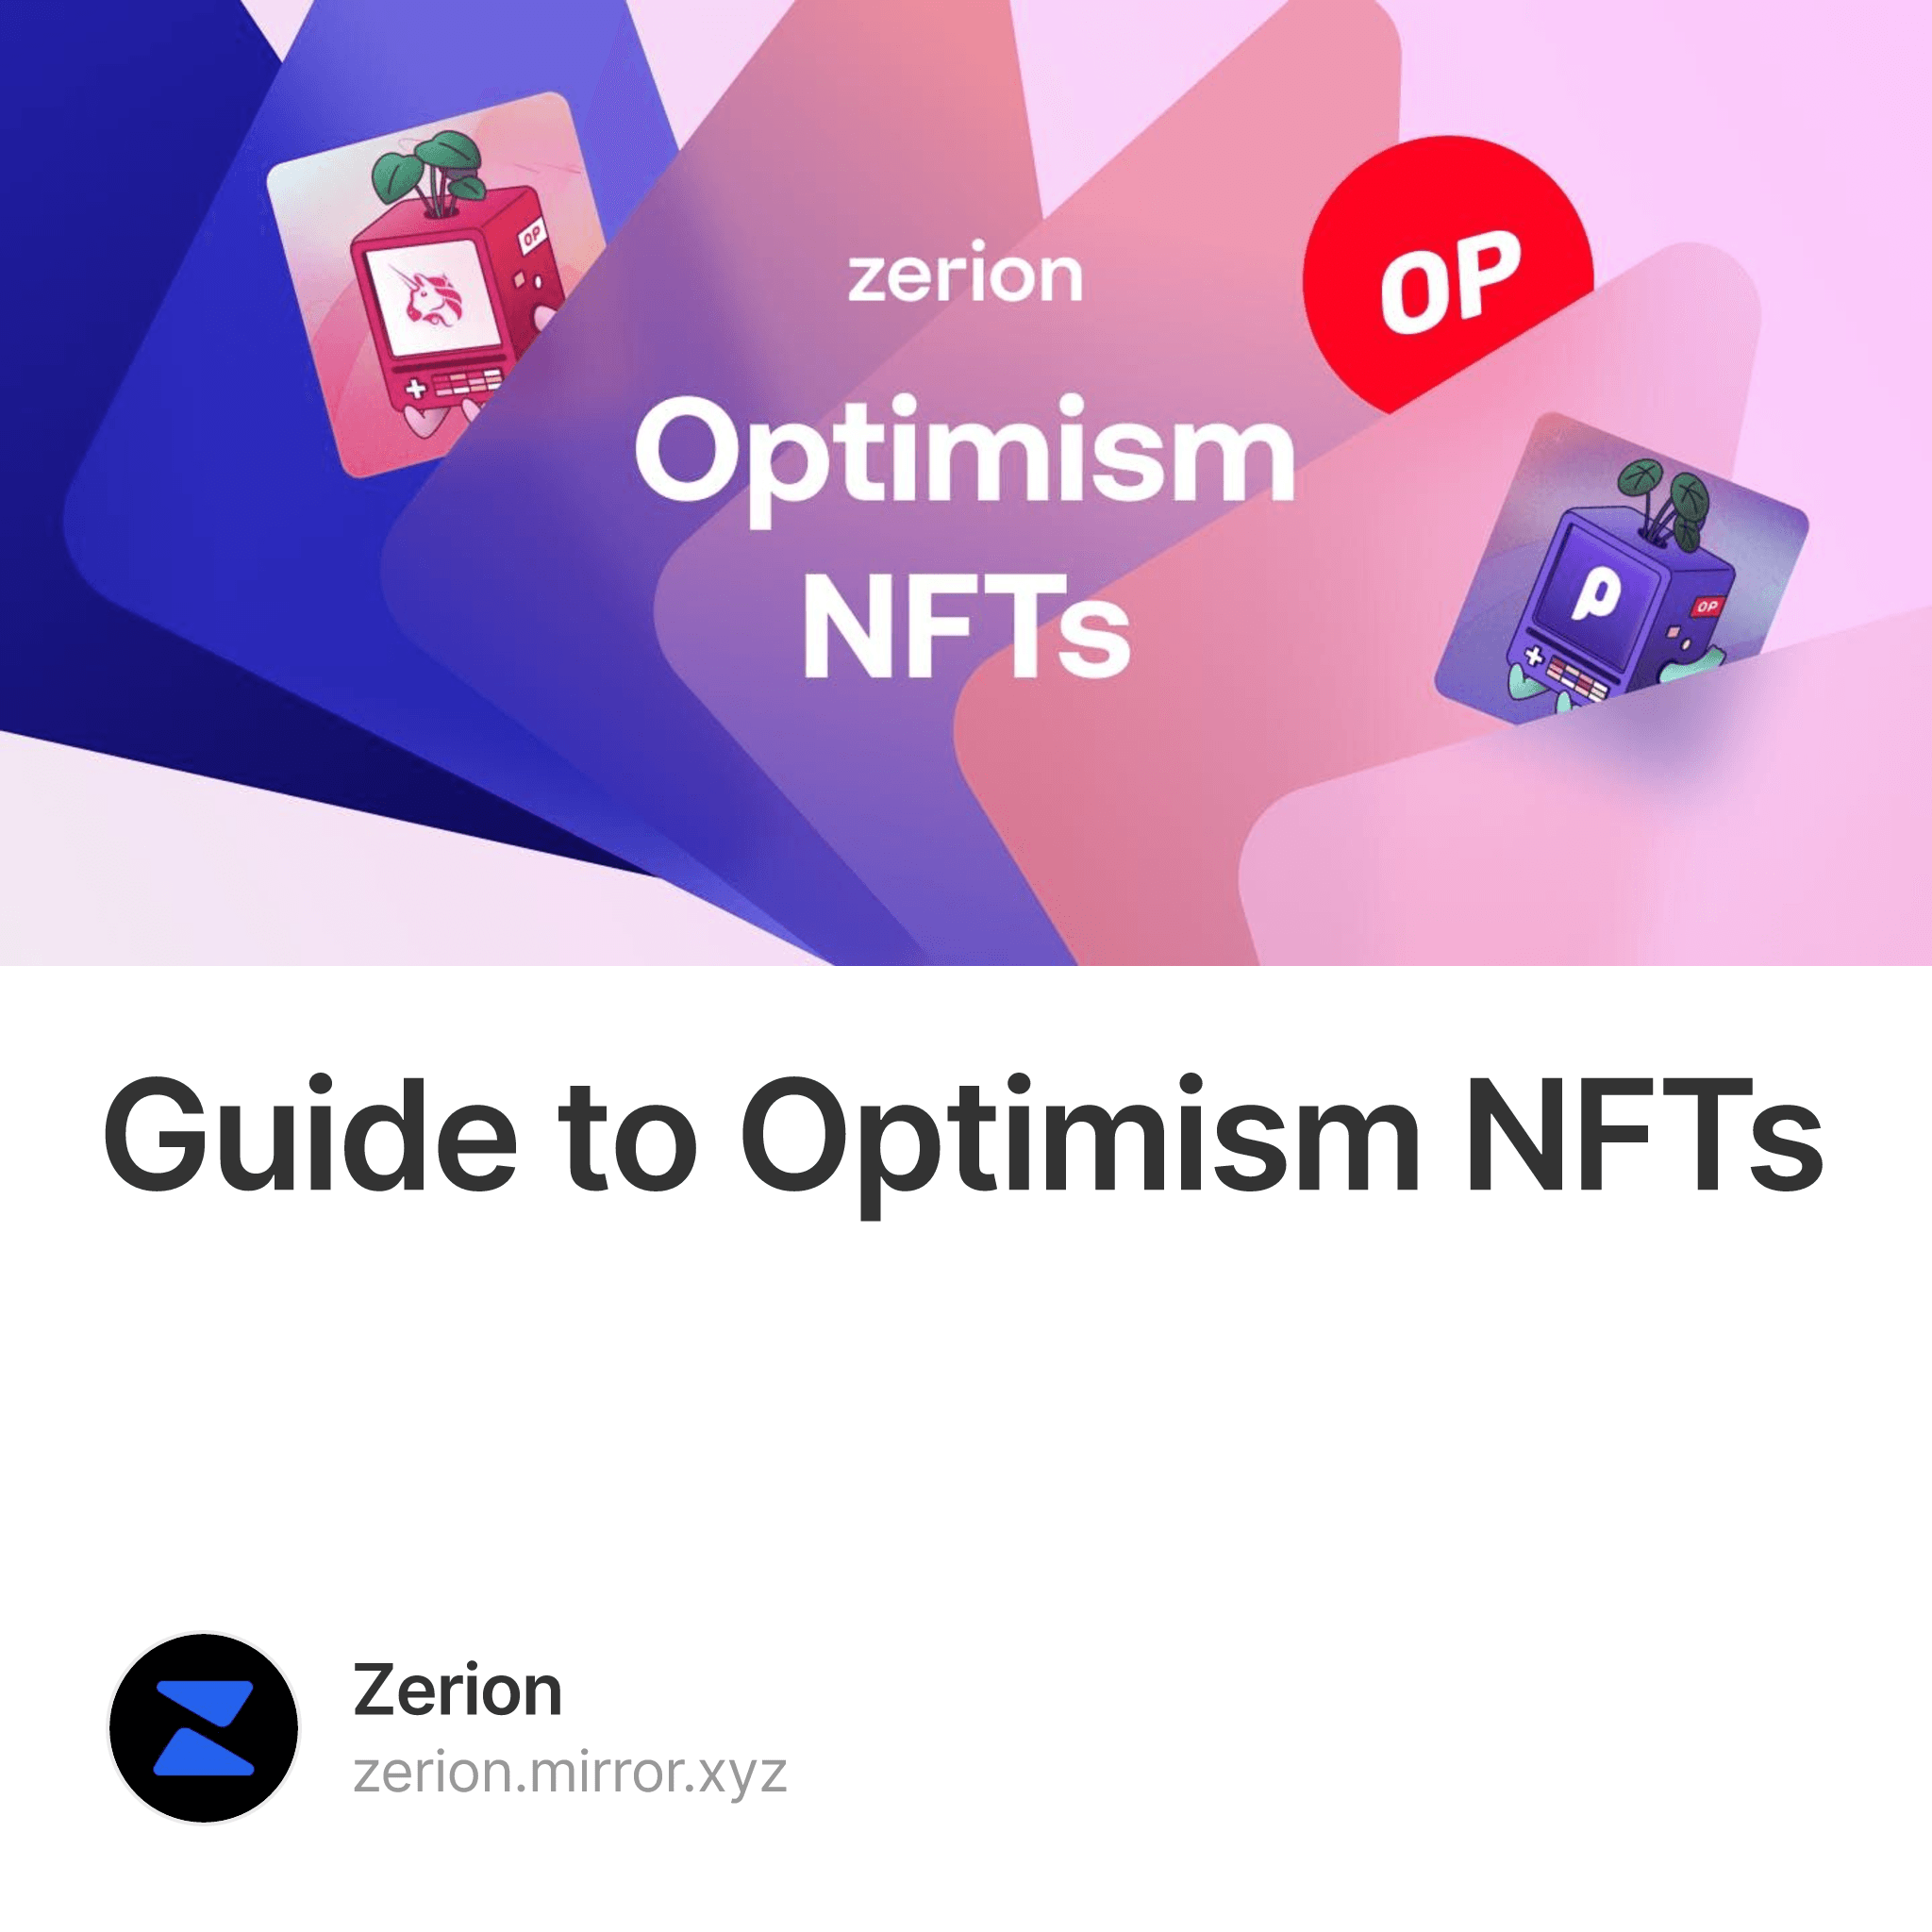 Guide to Optimism NFTs 3247/7500